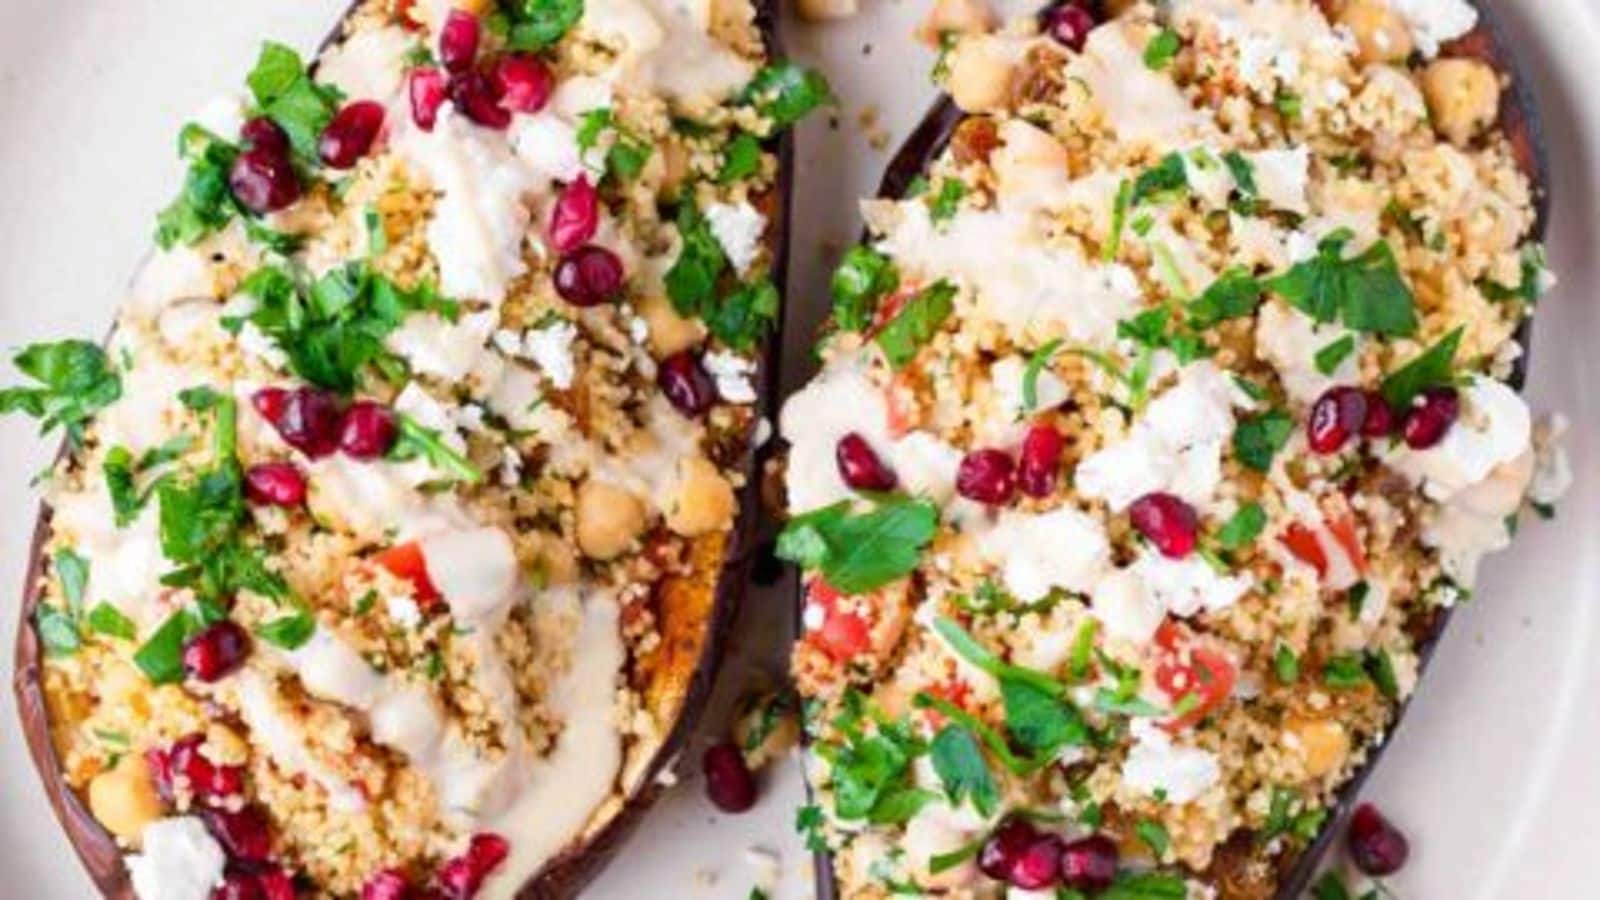 Cook this wholesome Mediterranean stuffed eggplants at home